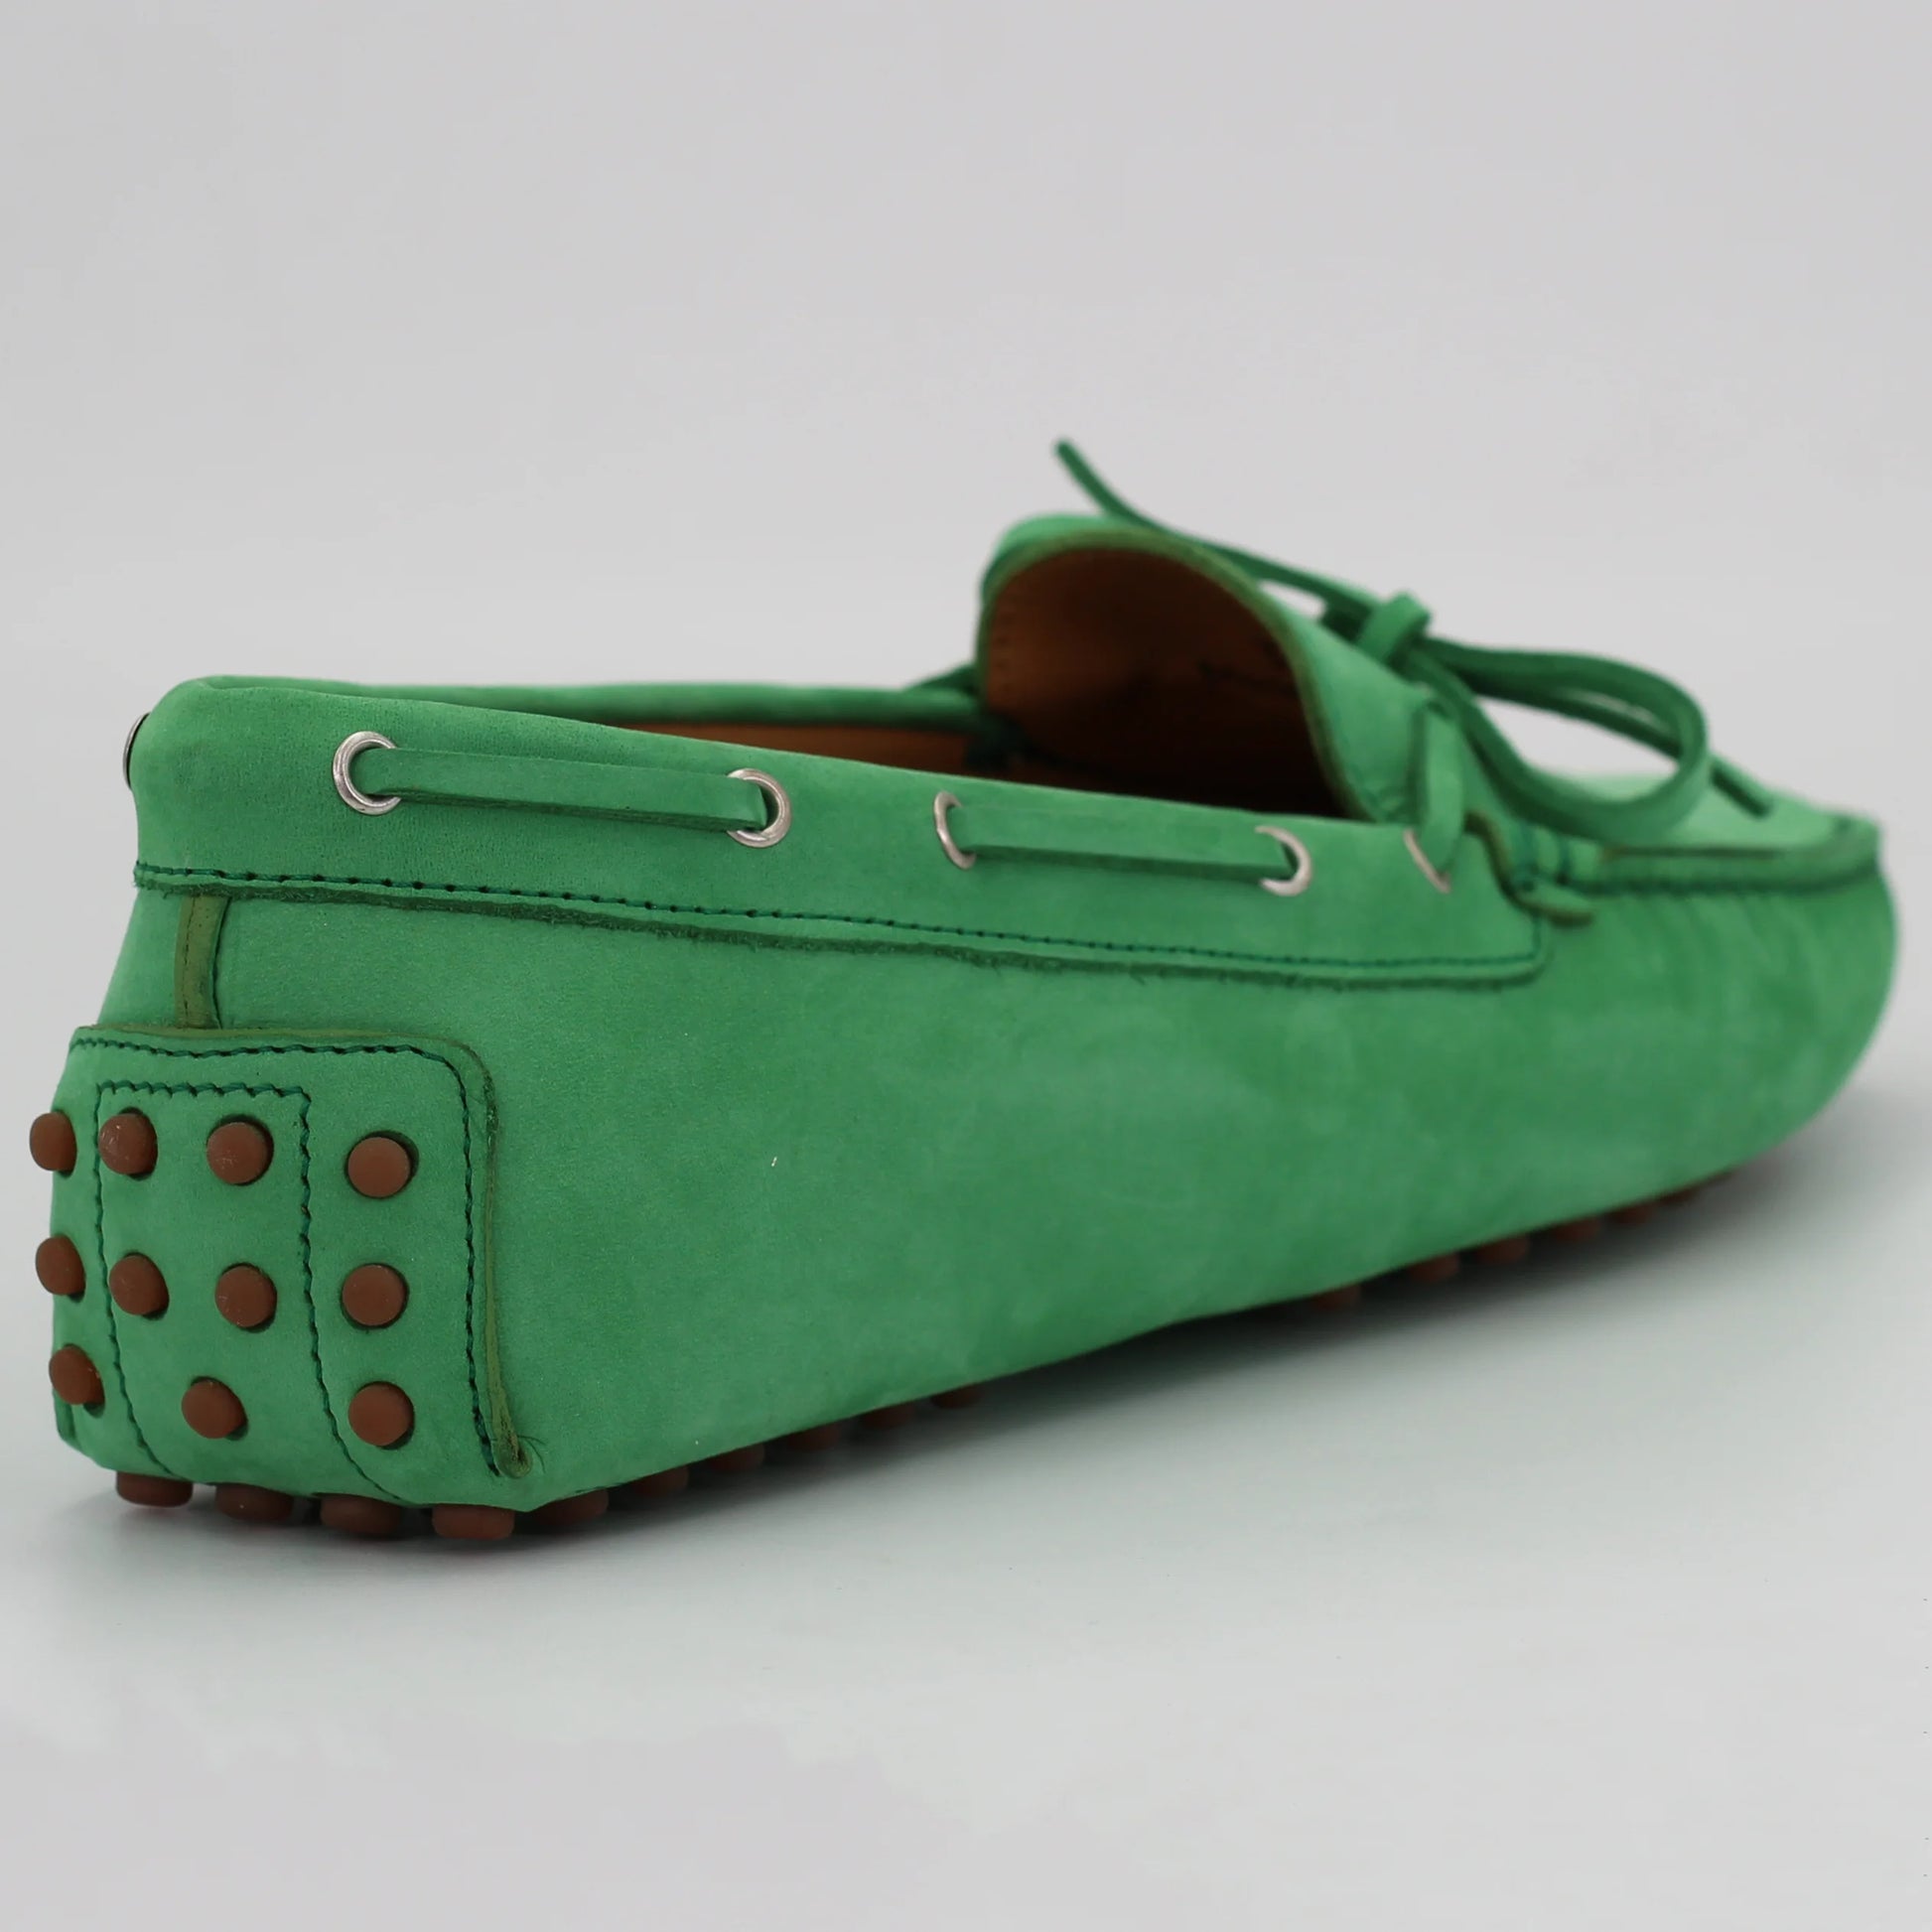 Shop Handmade Italian Leather moccasin in green (COND04011) or browse our range of hand-made Italian shoes in leather or suede in-store at Aliverti Cape Town, or shop online. We deliver in South Africa & offer multiple payment plans as well as accept multiple safe & secure payment methods.